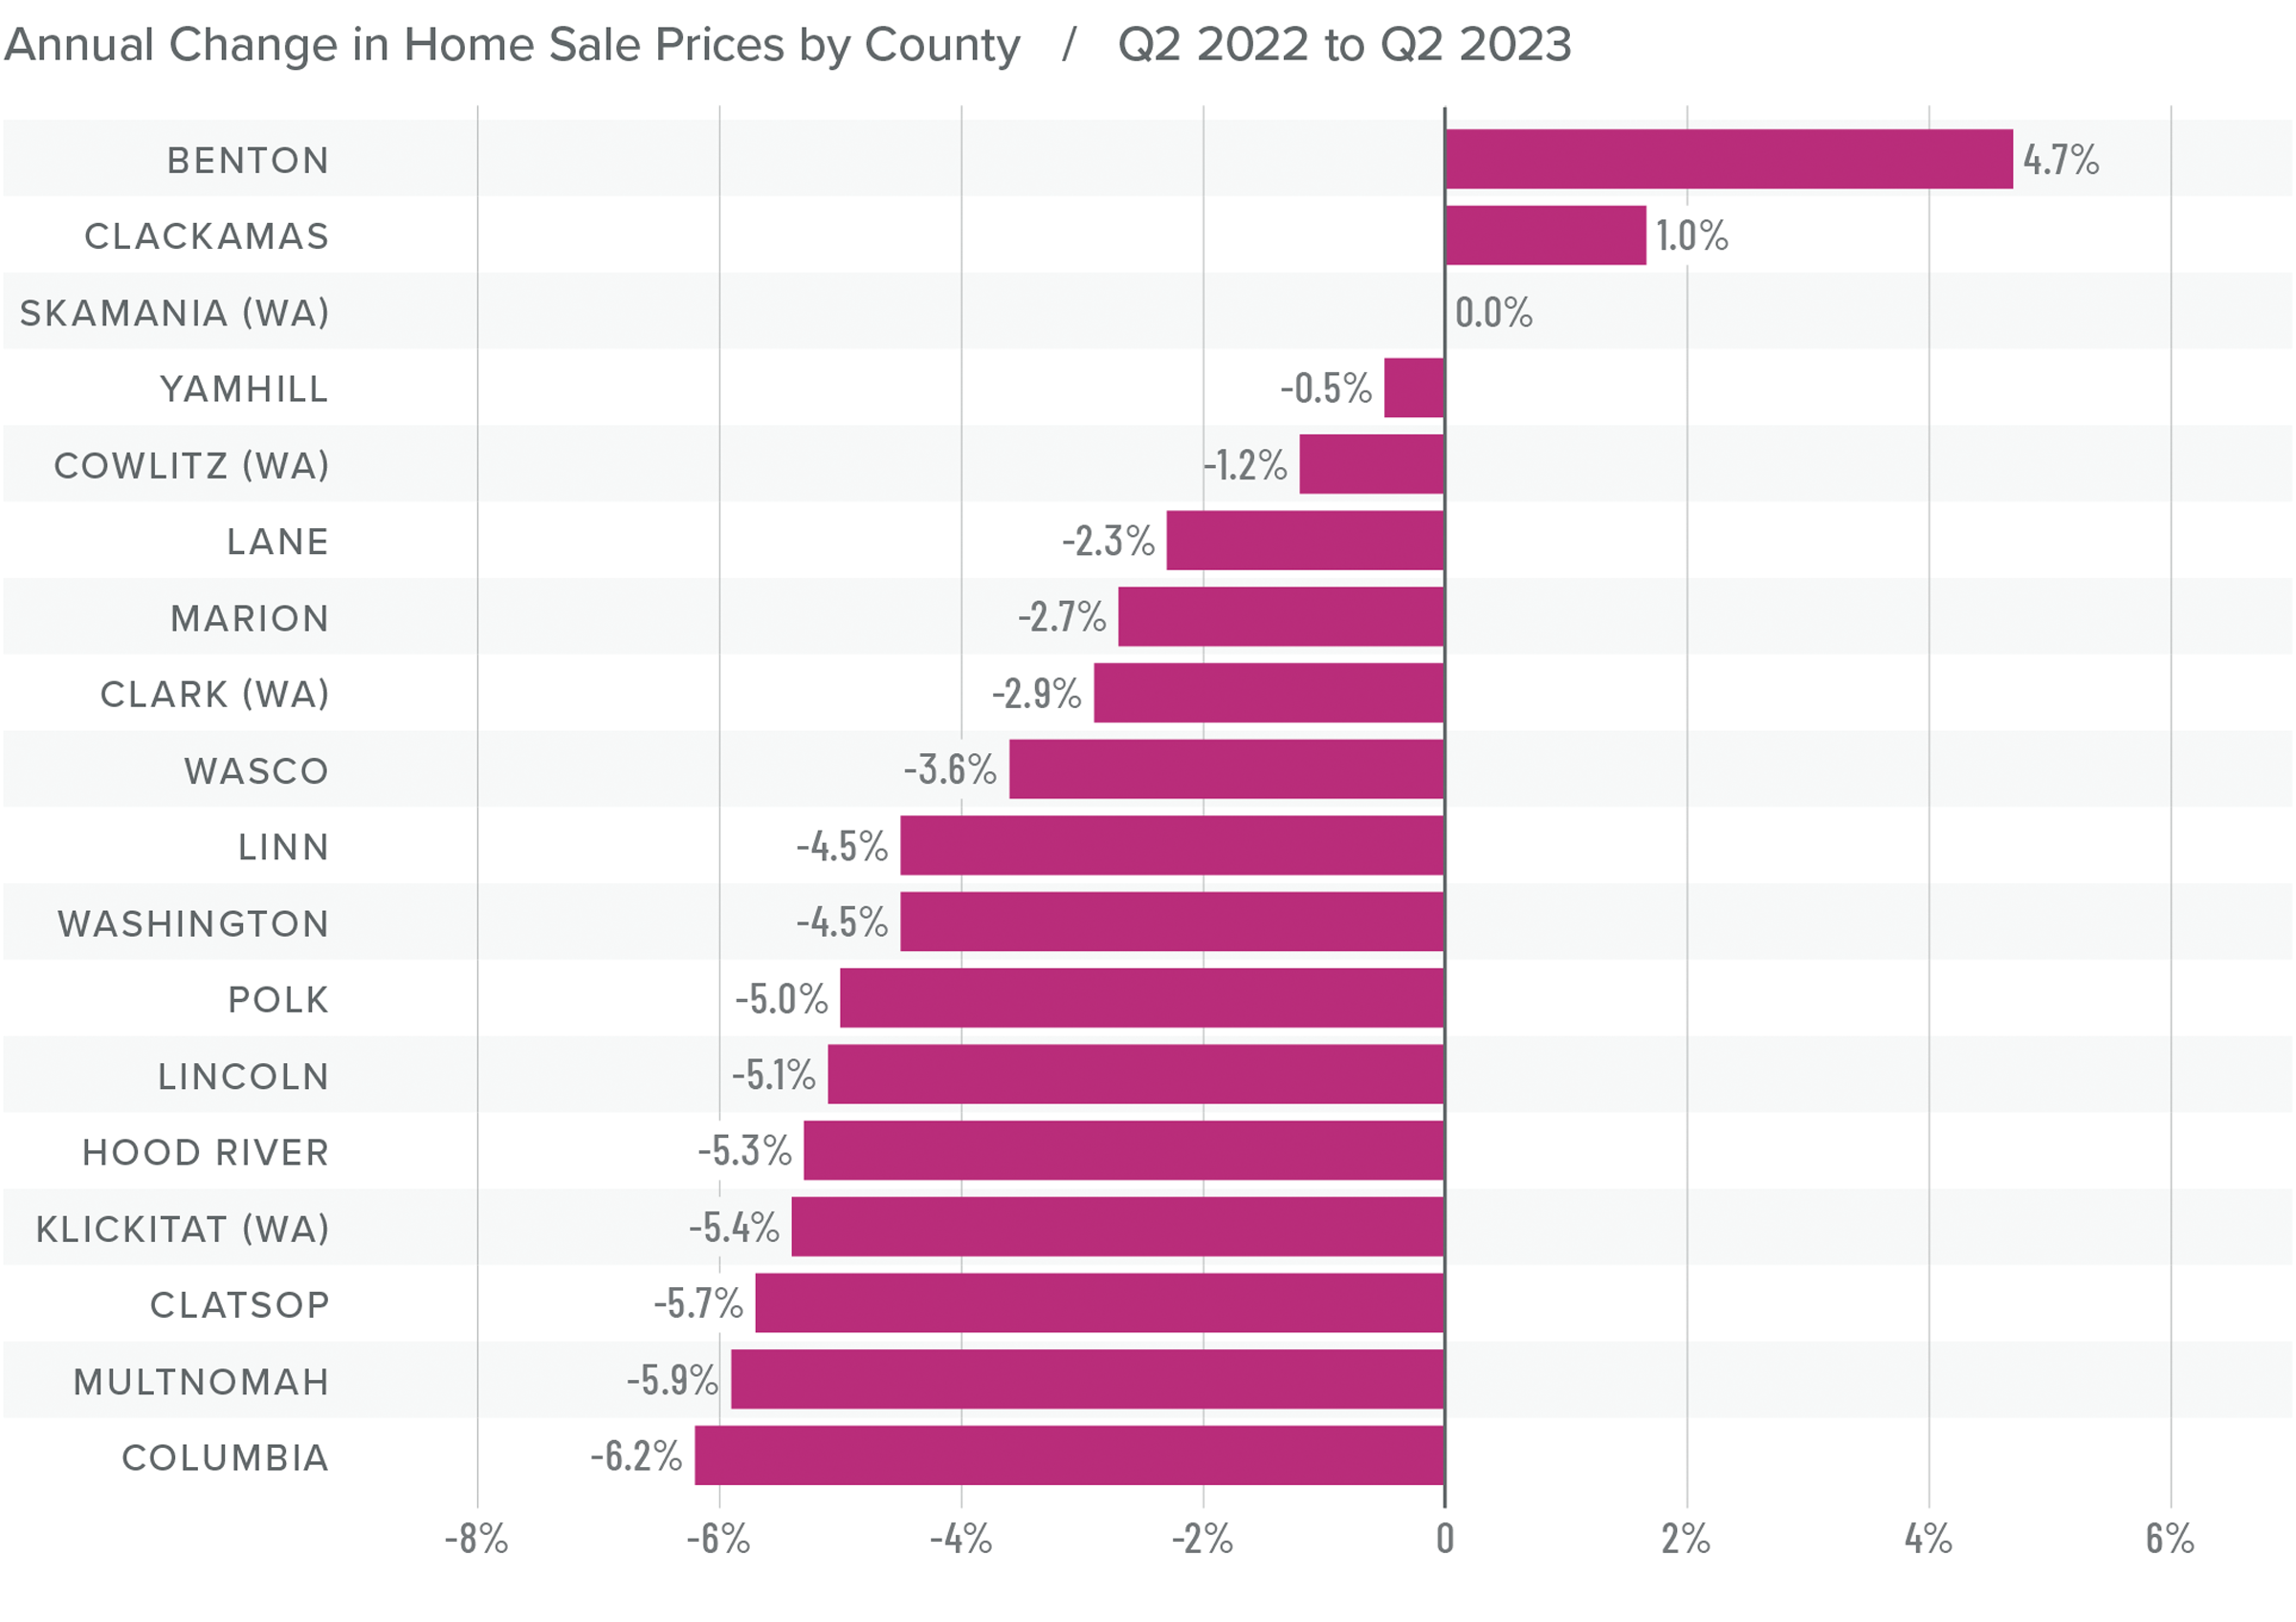 A bar graph showing the annual change in home sale prices by county in Northwest Oregon and Southwest Washington from Q2 2022 to Q2 2023. Bento County tops the list at 4.7%, while Columbia County had the greatest decline at -6.2%. Wasco and Washington were toward the middle at around -4%, while Multnomah County had the second greatest decline at -5.9%.